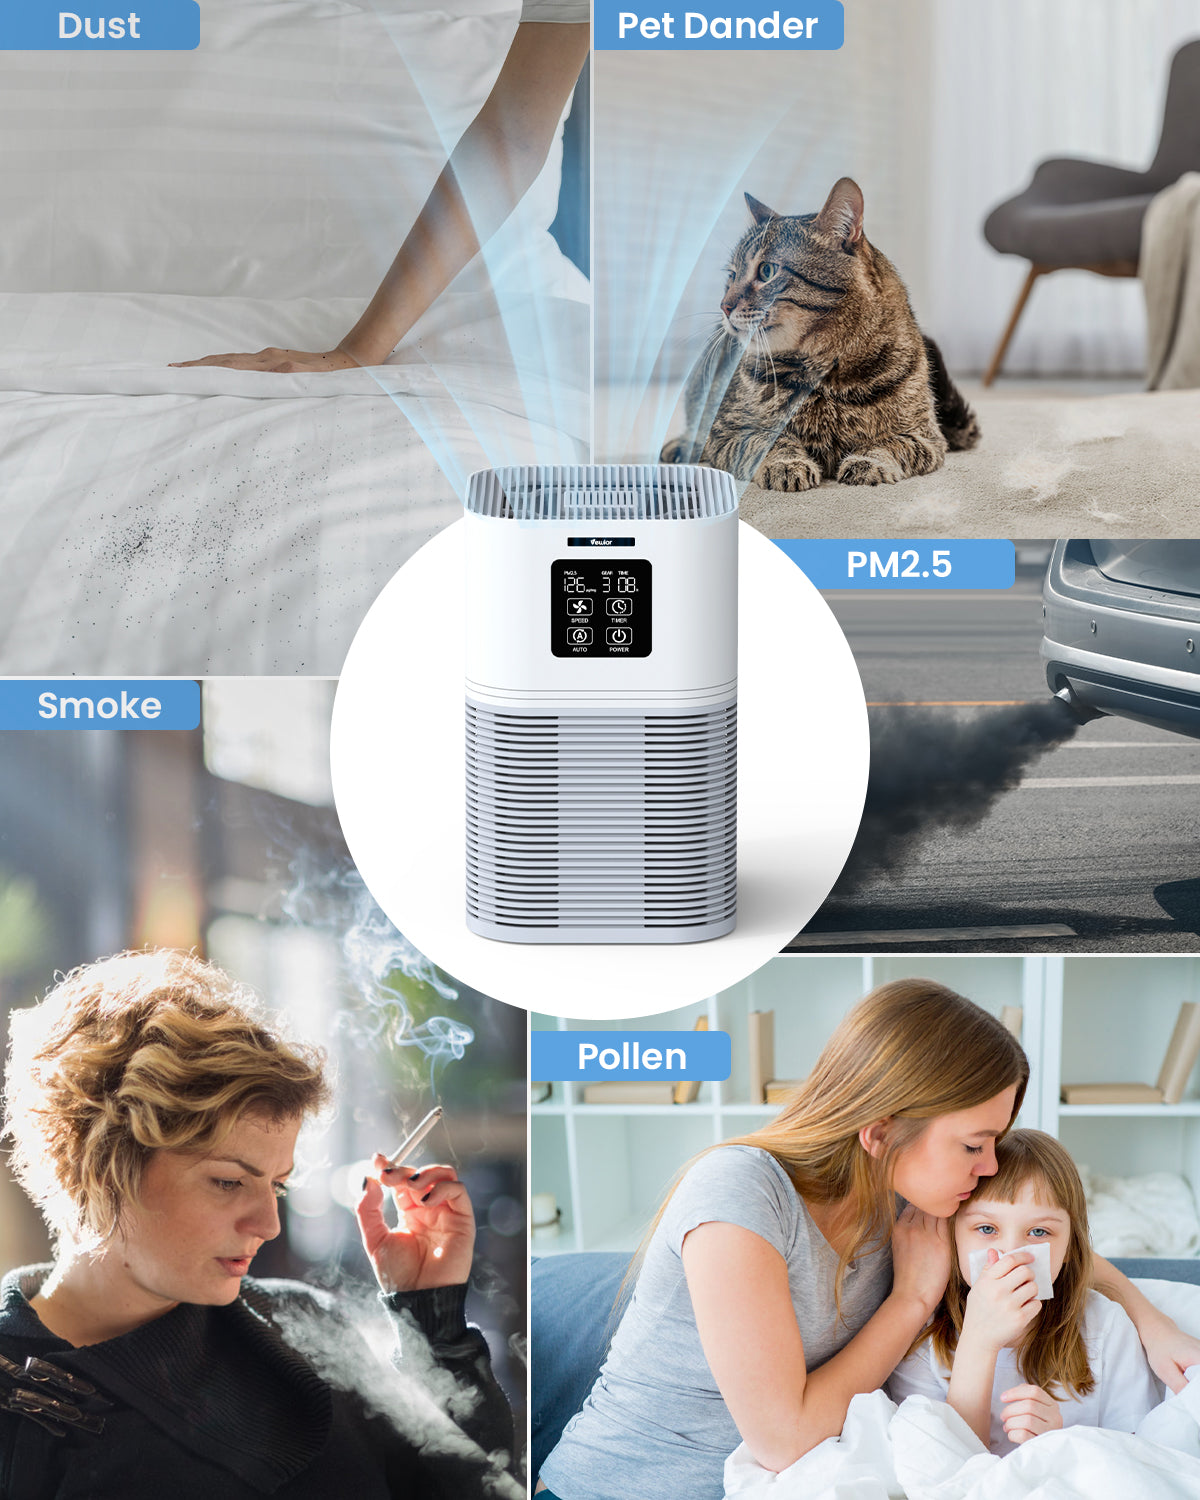 VEWIOR 2 in 1 Air Purifier with H13 Filters for Home Allergies Pets Hair Odor Eliminators